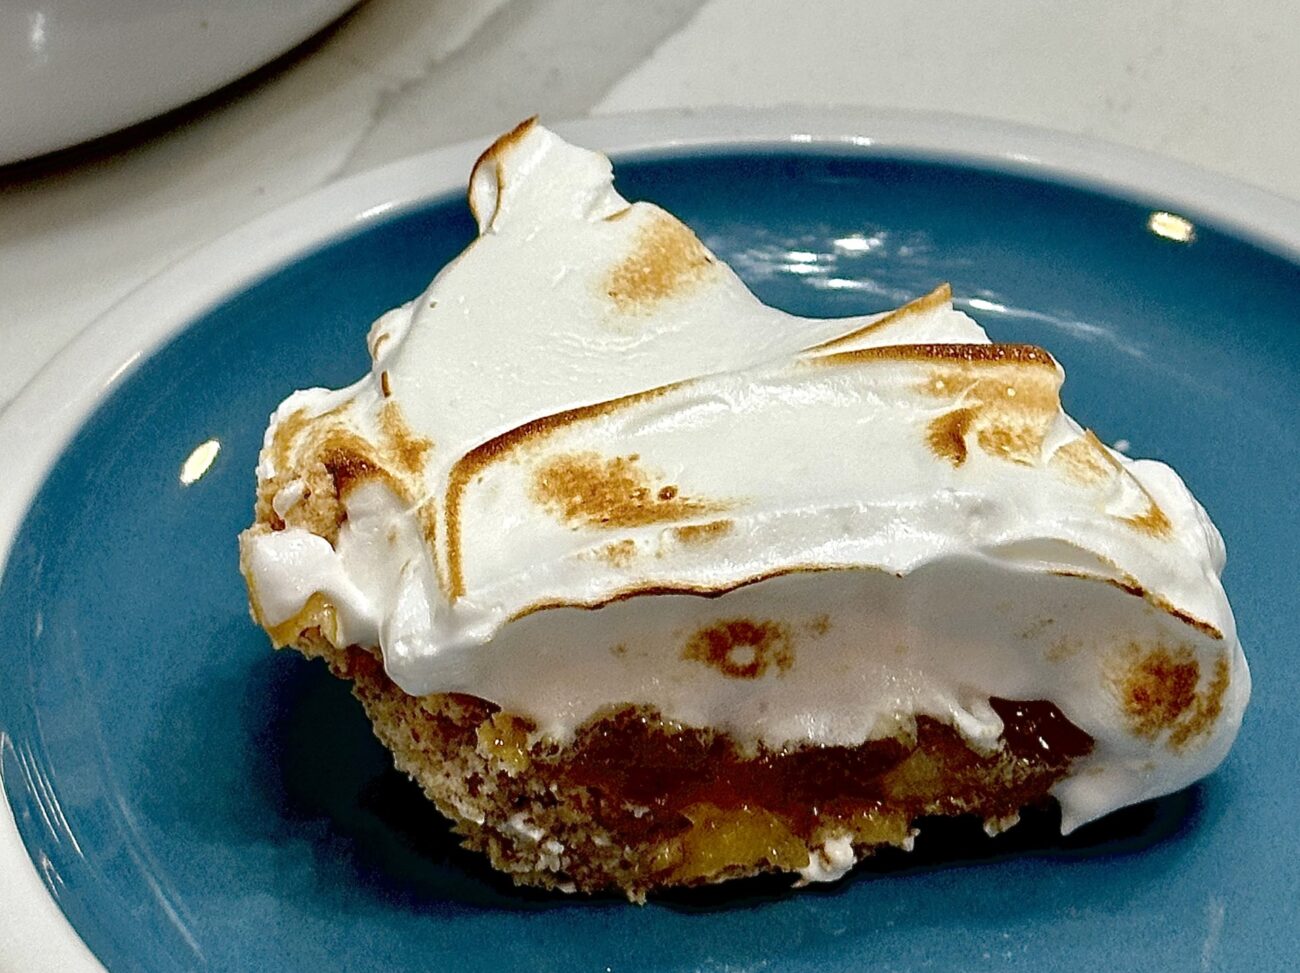 Plum Pie with an Amazing Almond Meringue Pie Crust and Meringue Topping